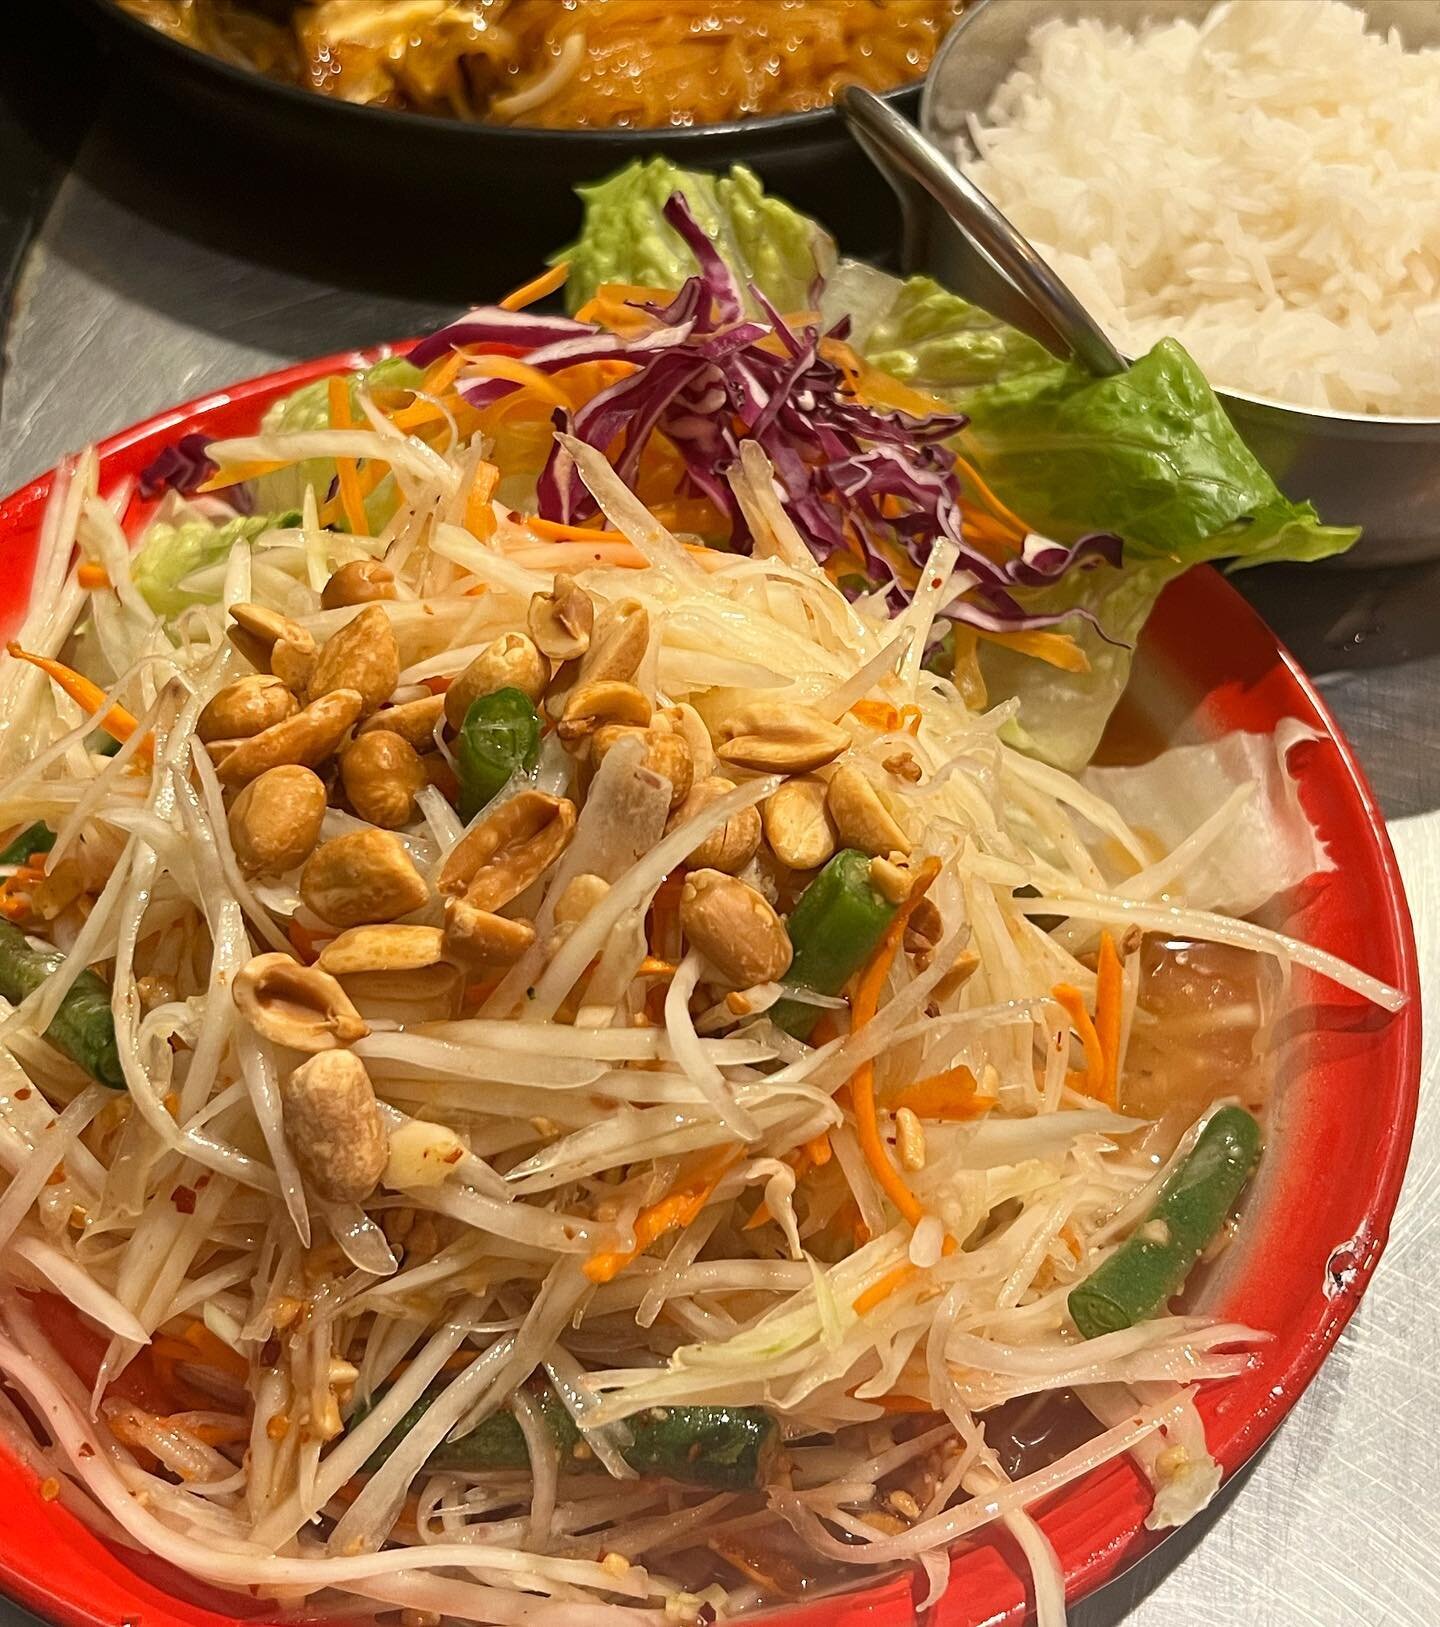 Refreshing Papaya Salad ✨

Vegan, vegetarian and gluten-free friendly 🌱 No MSG 

Now open for dine-in, take-out, and delivery! ✨

📞 661-513-0330, 661-513-0350 
🖥️ Order online at thaichefsvalencia.com 

Thai Chefs Restaurant 
📍28014 Seco Canyon R